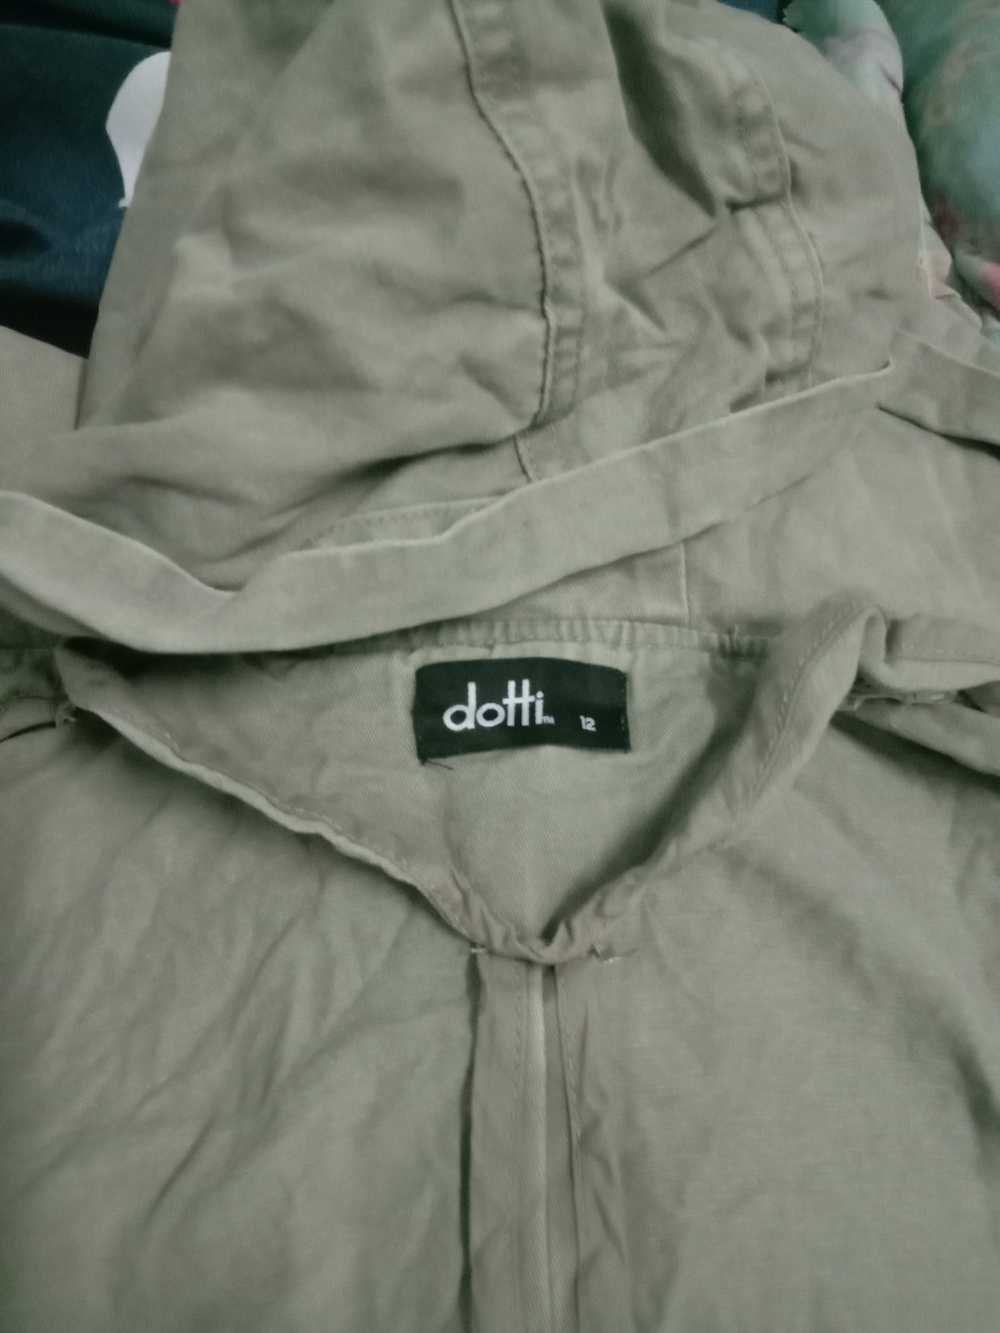 Military × Other × Streetwear Dotti military jack… - image 7